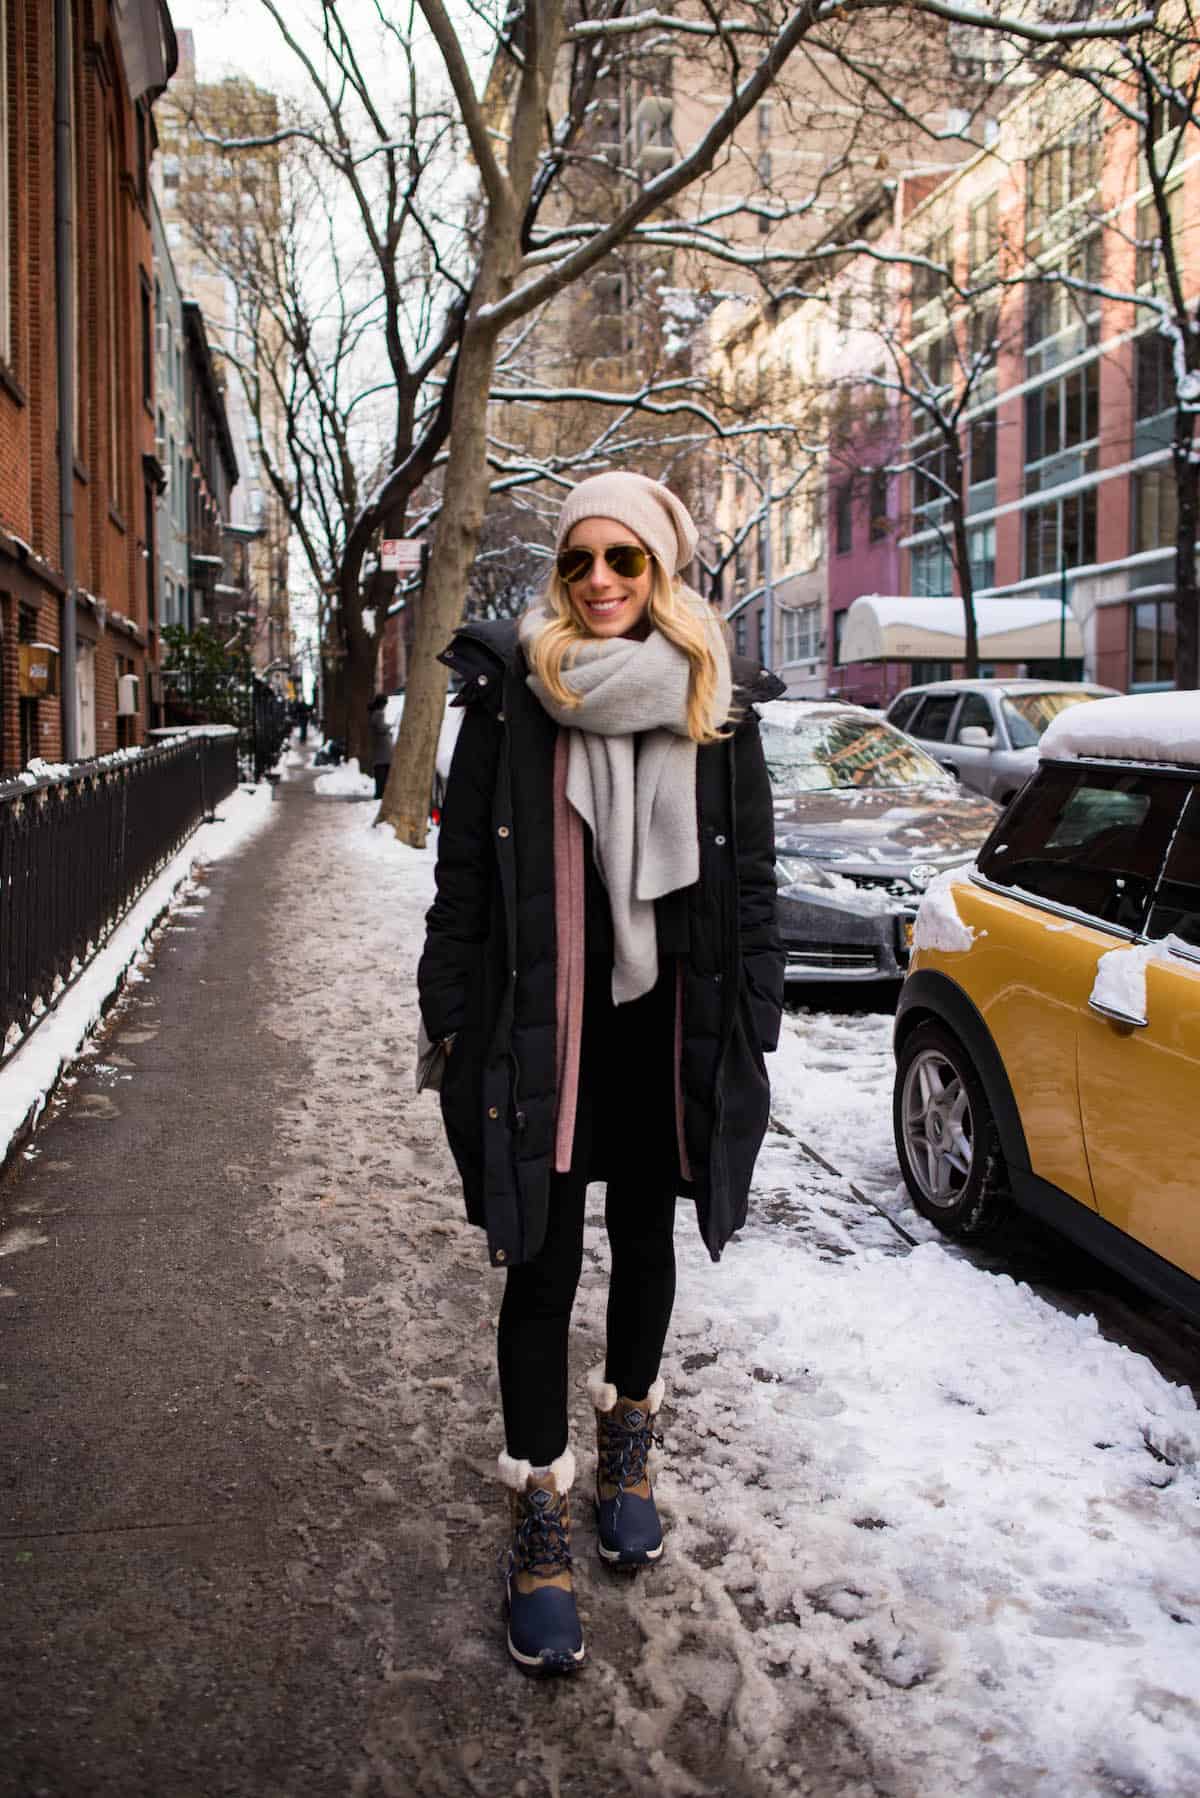 How To Dress Stylish For Cold Weather